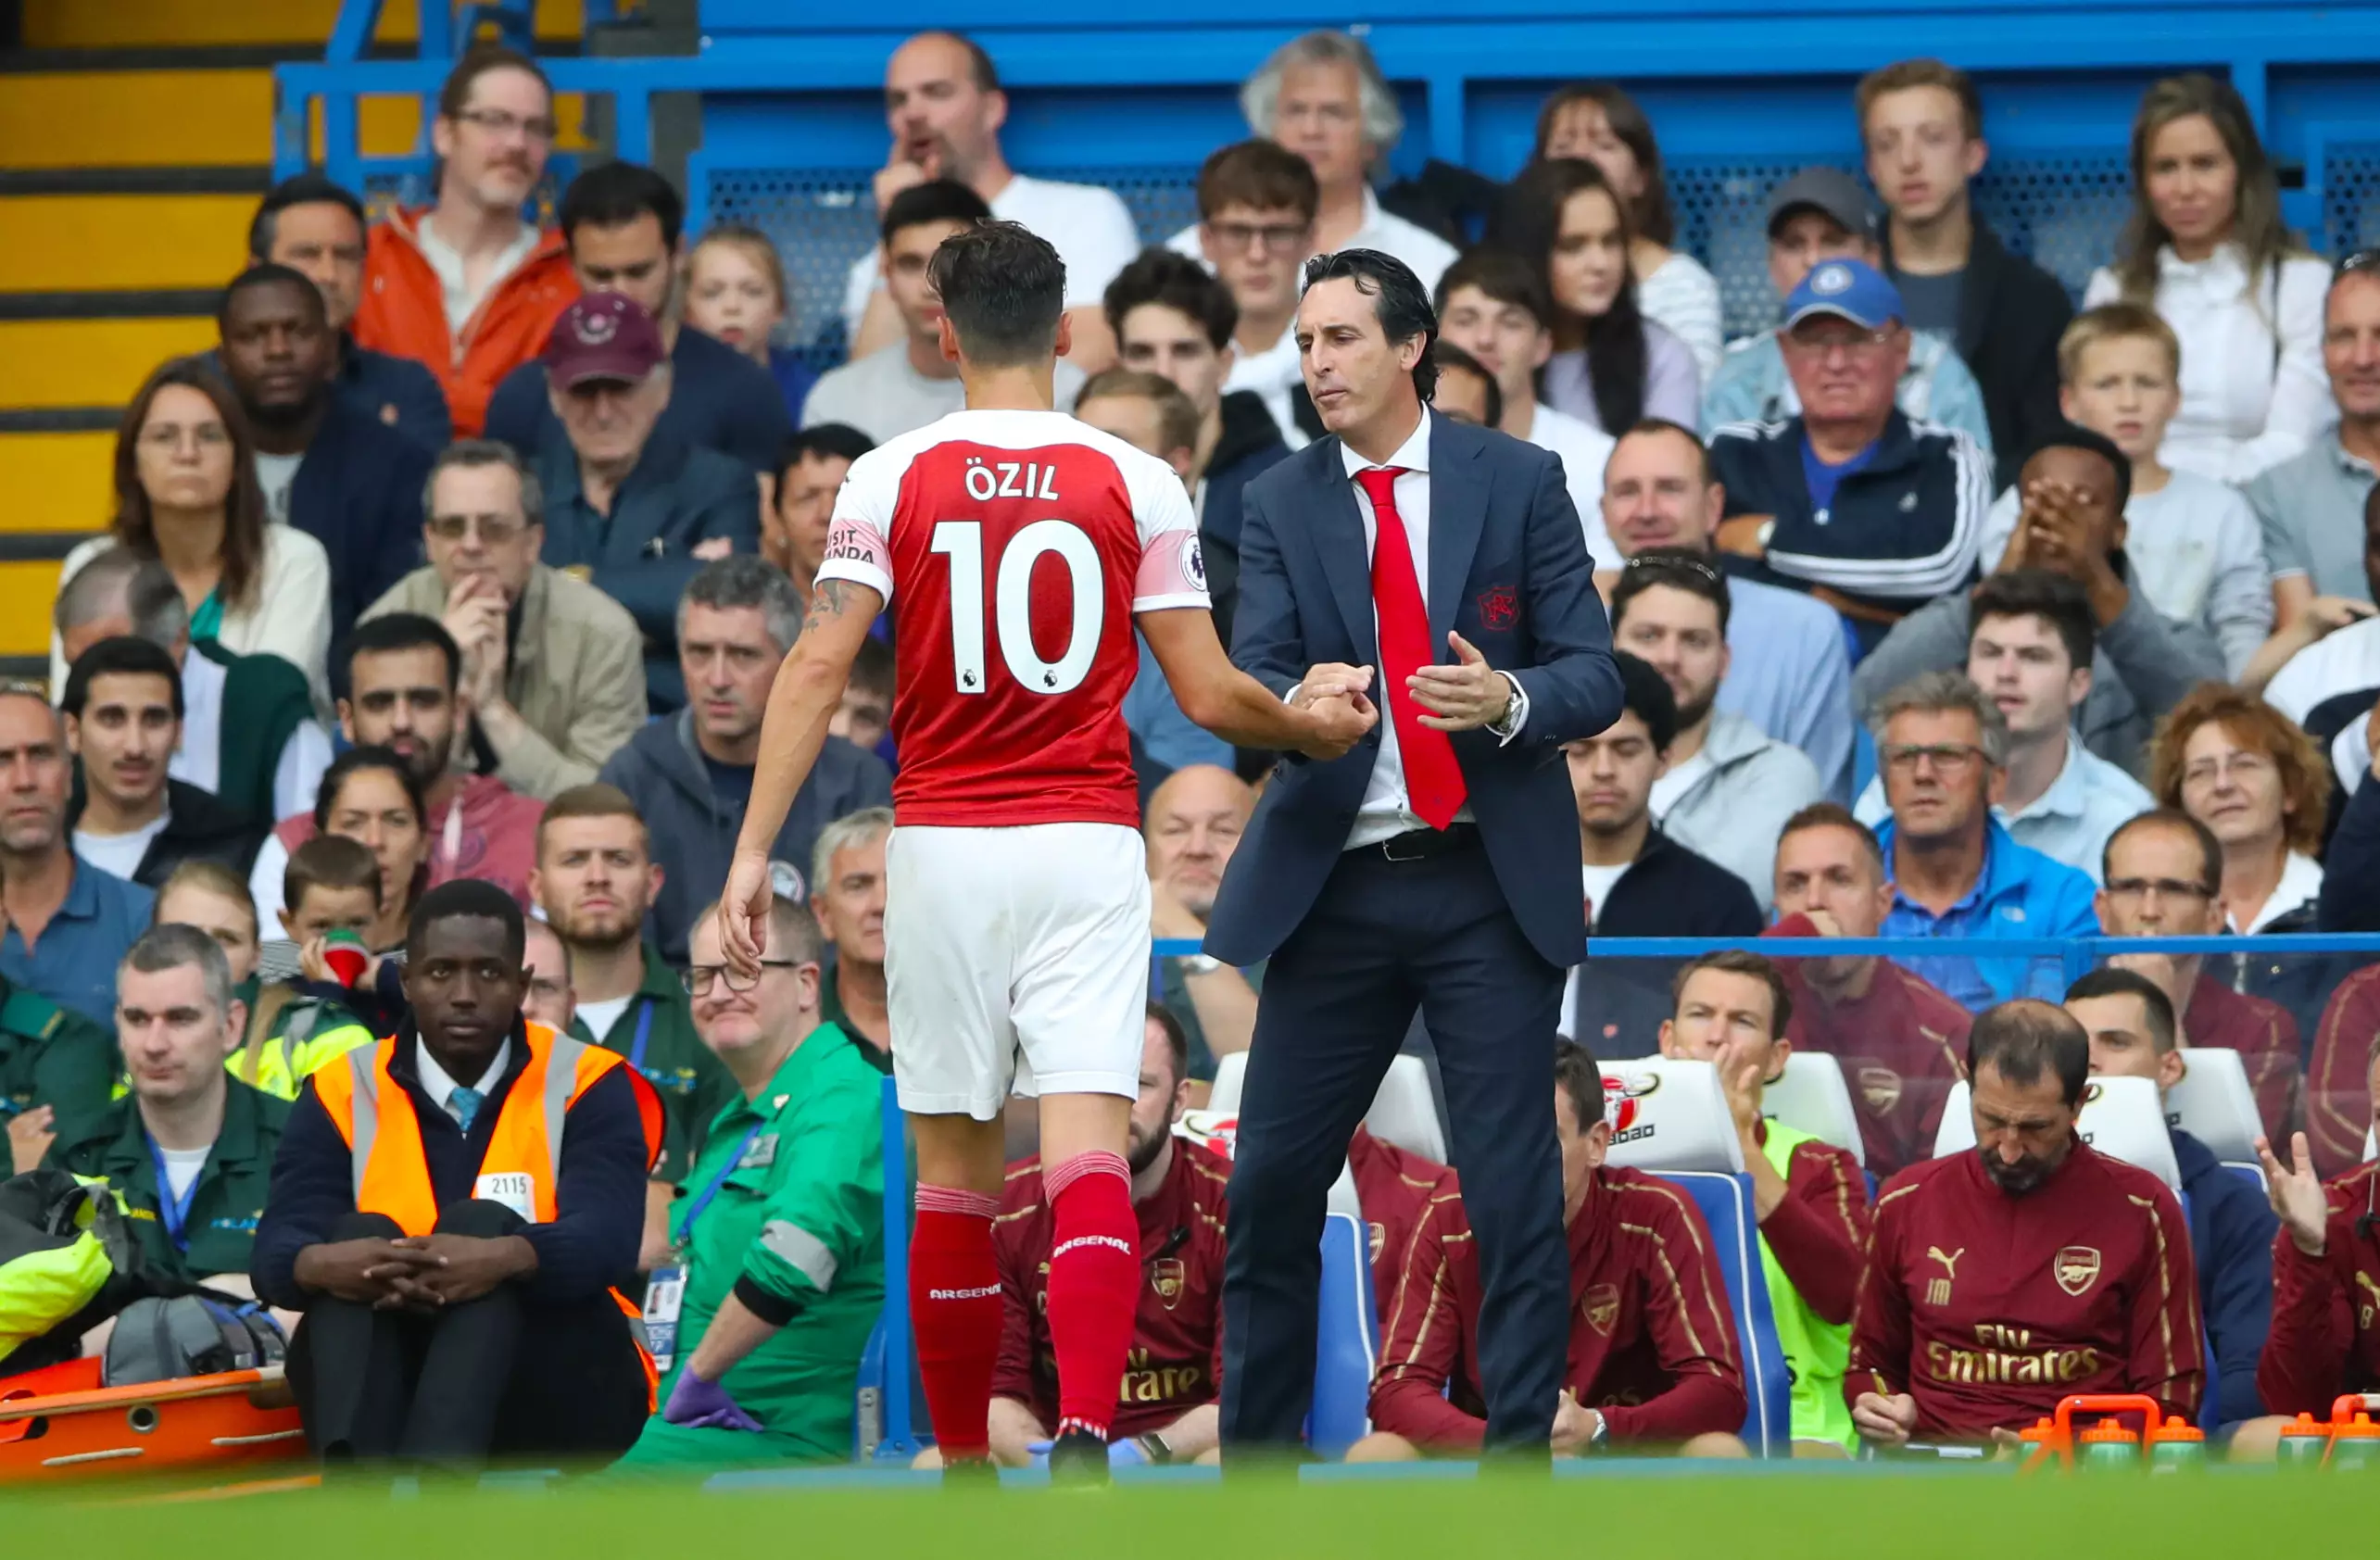 Ozil's place in the side is under threat as Neville said. Image: PA Images